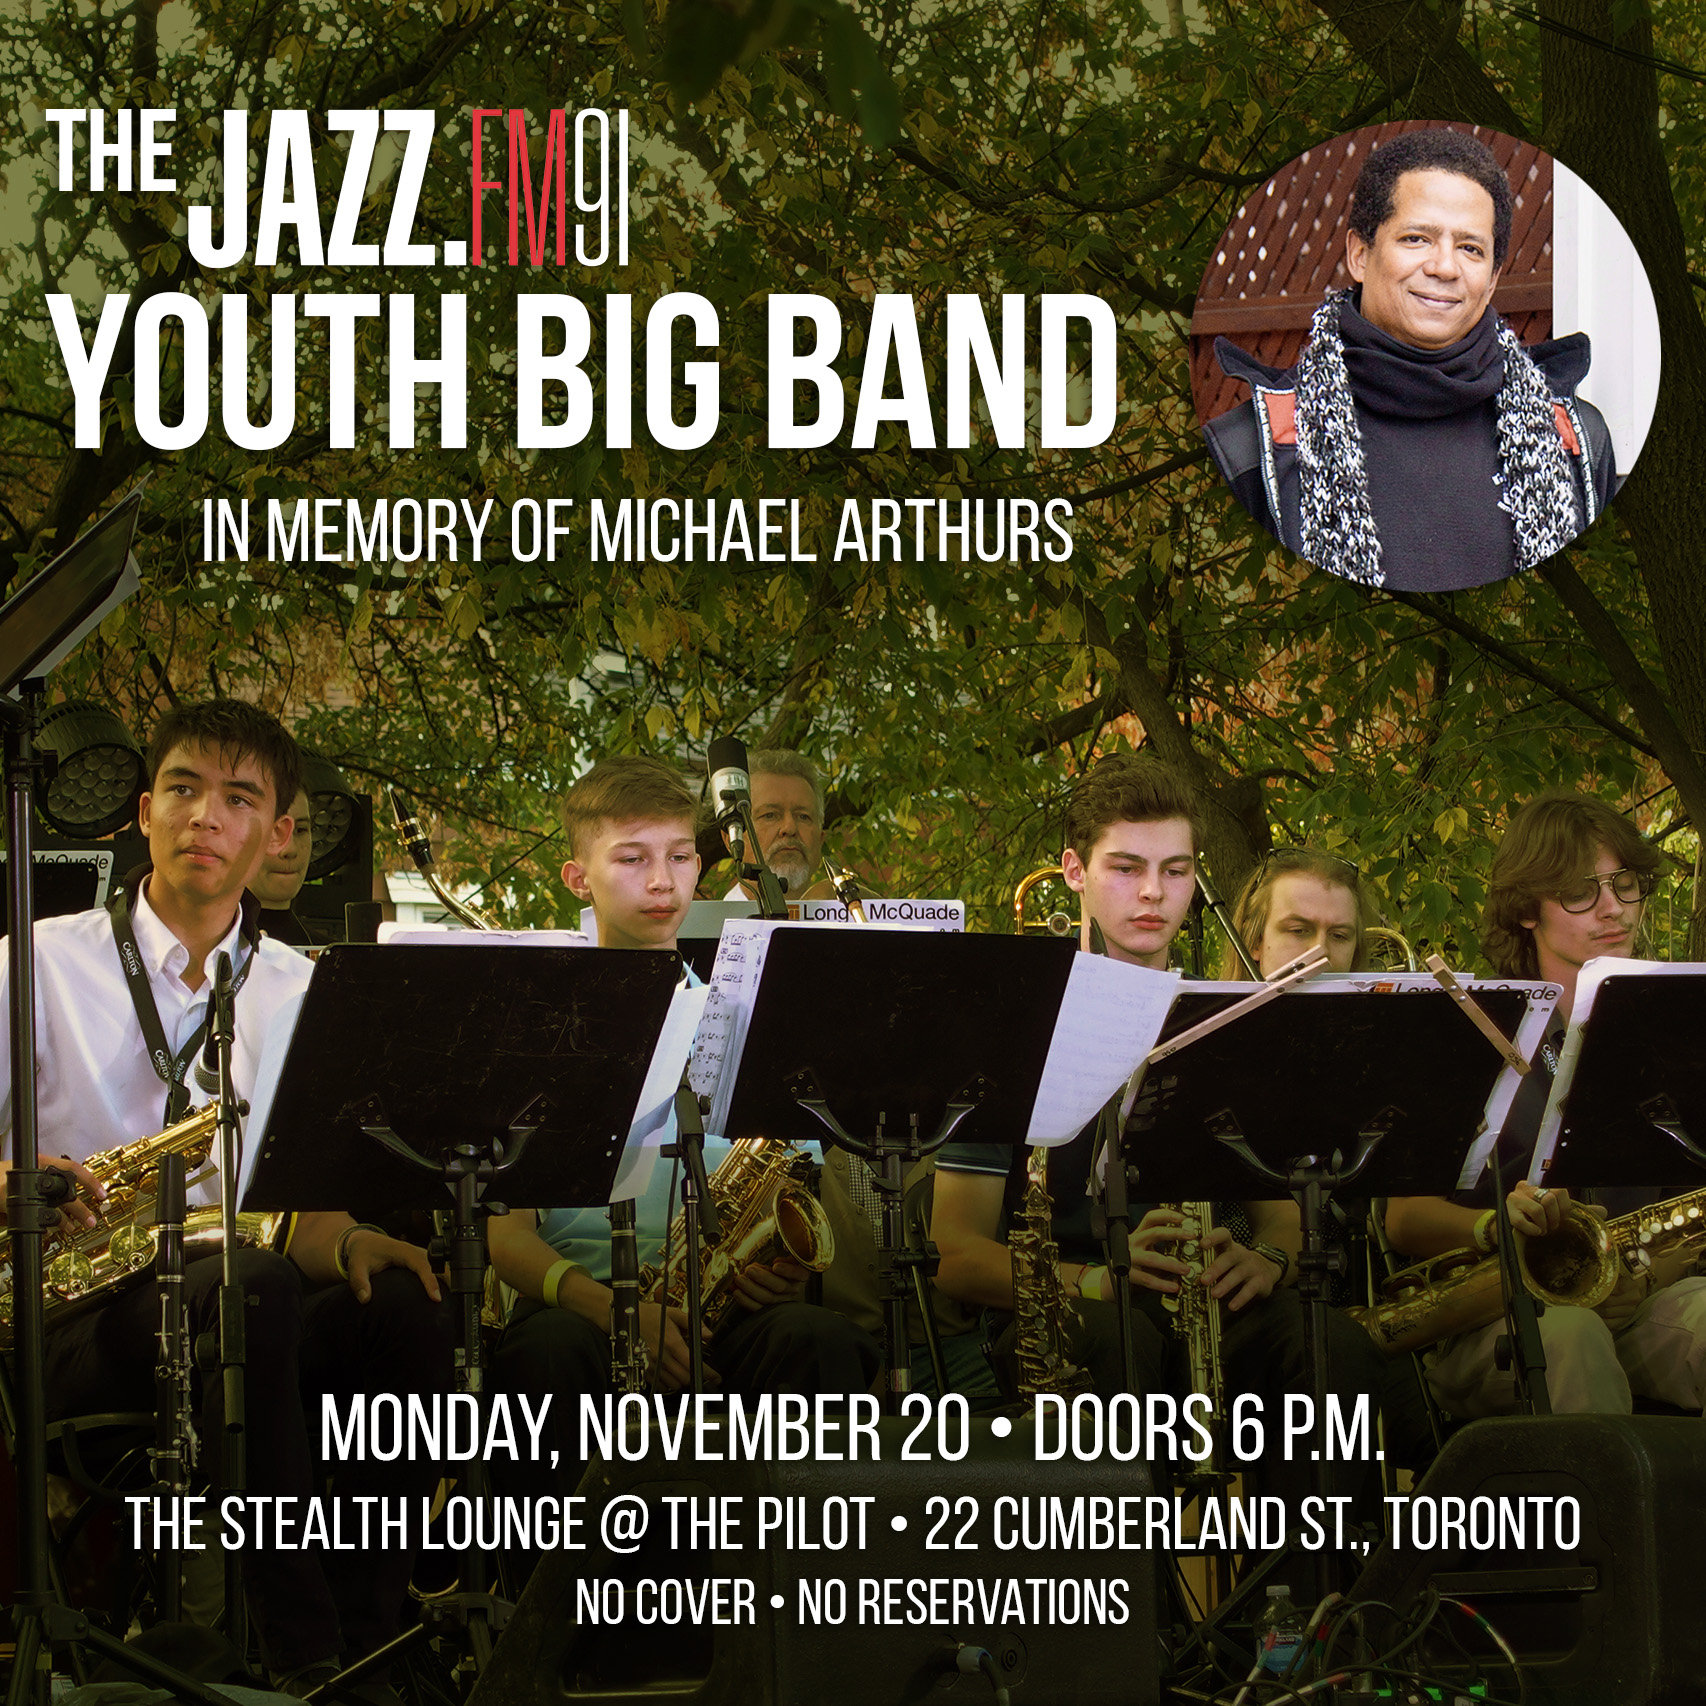 The JAZZ.FM91 Youth Big Band: In Memory of Michael Arthurs